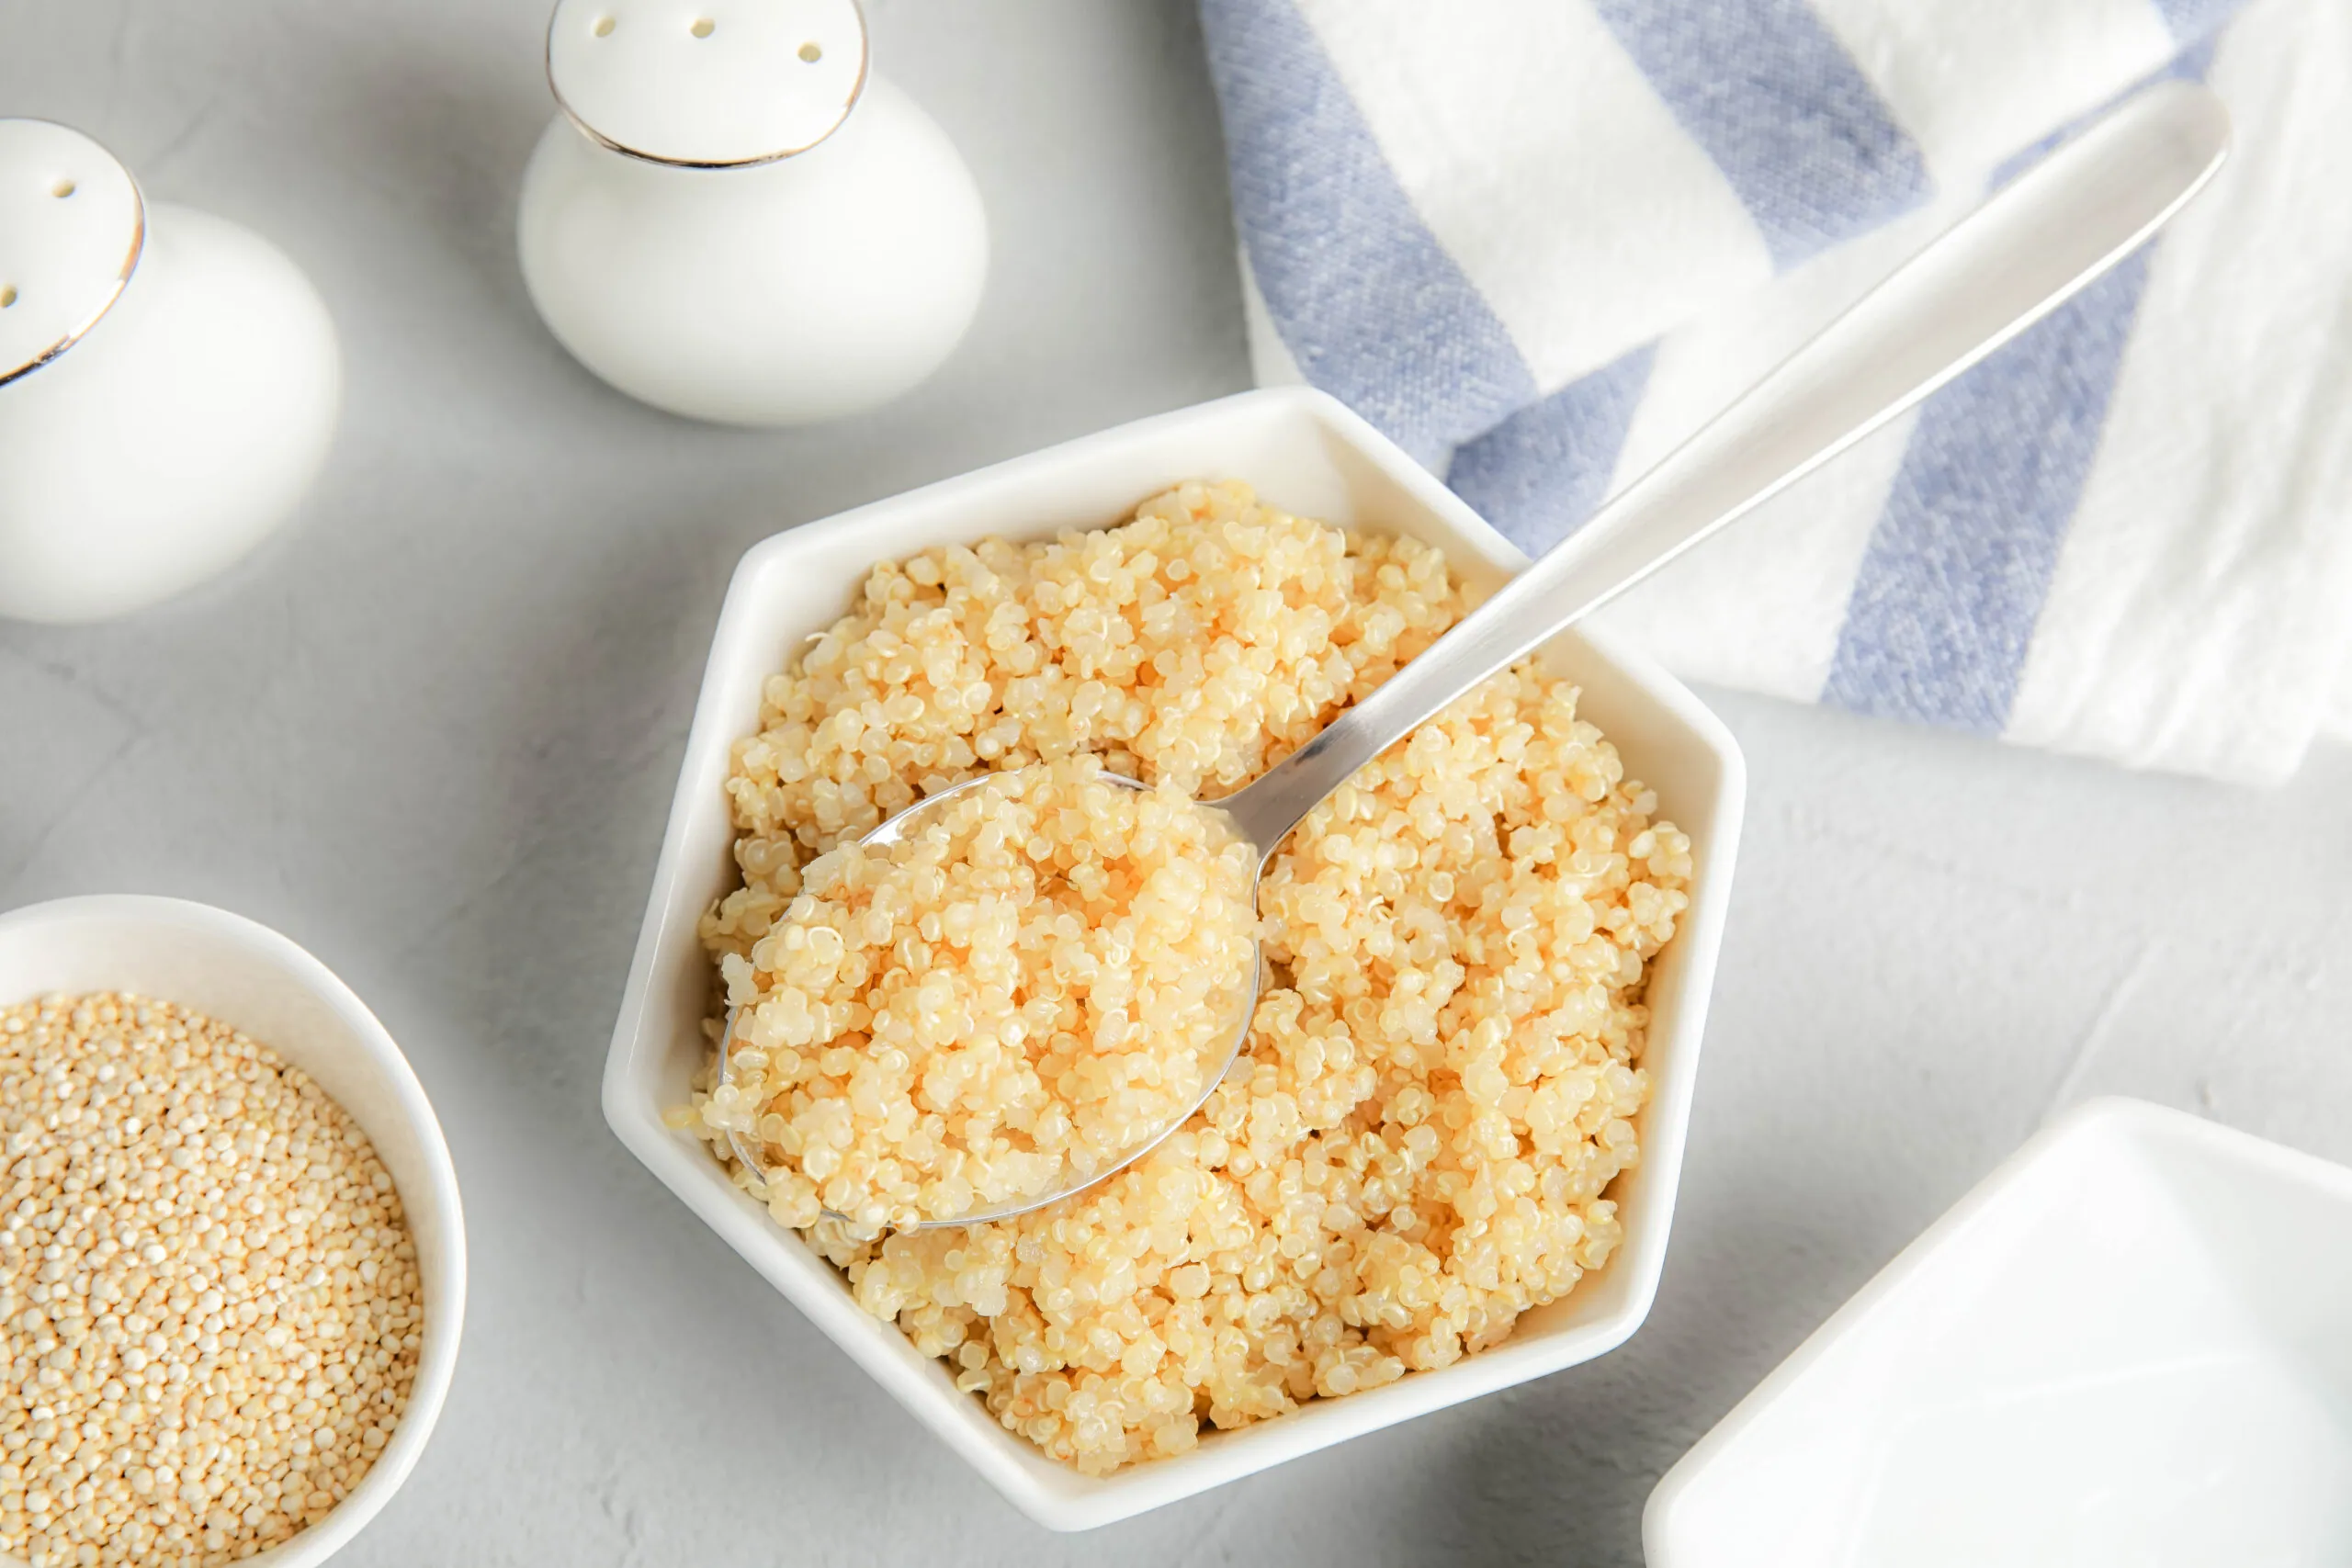 Quinoa is a nutritious and versatile dish.